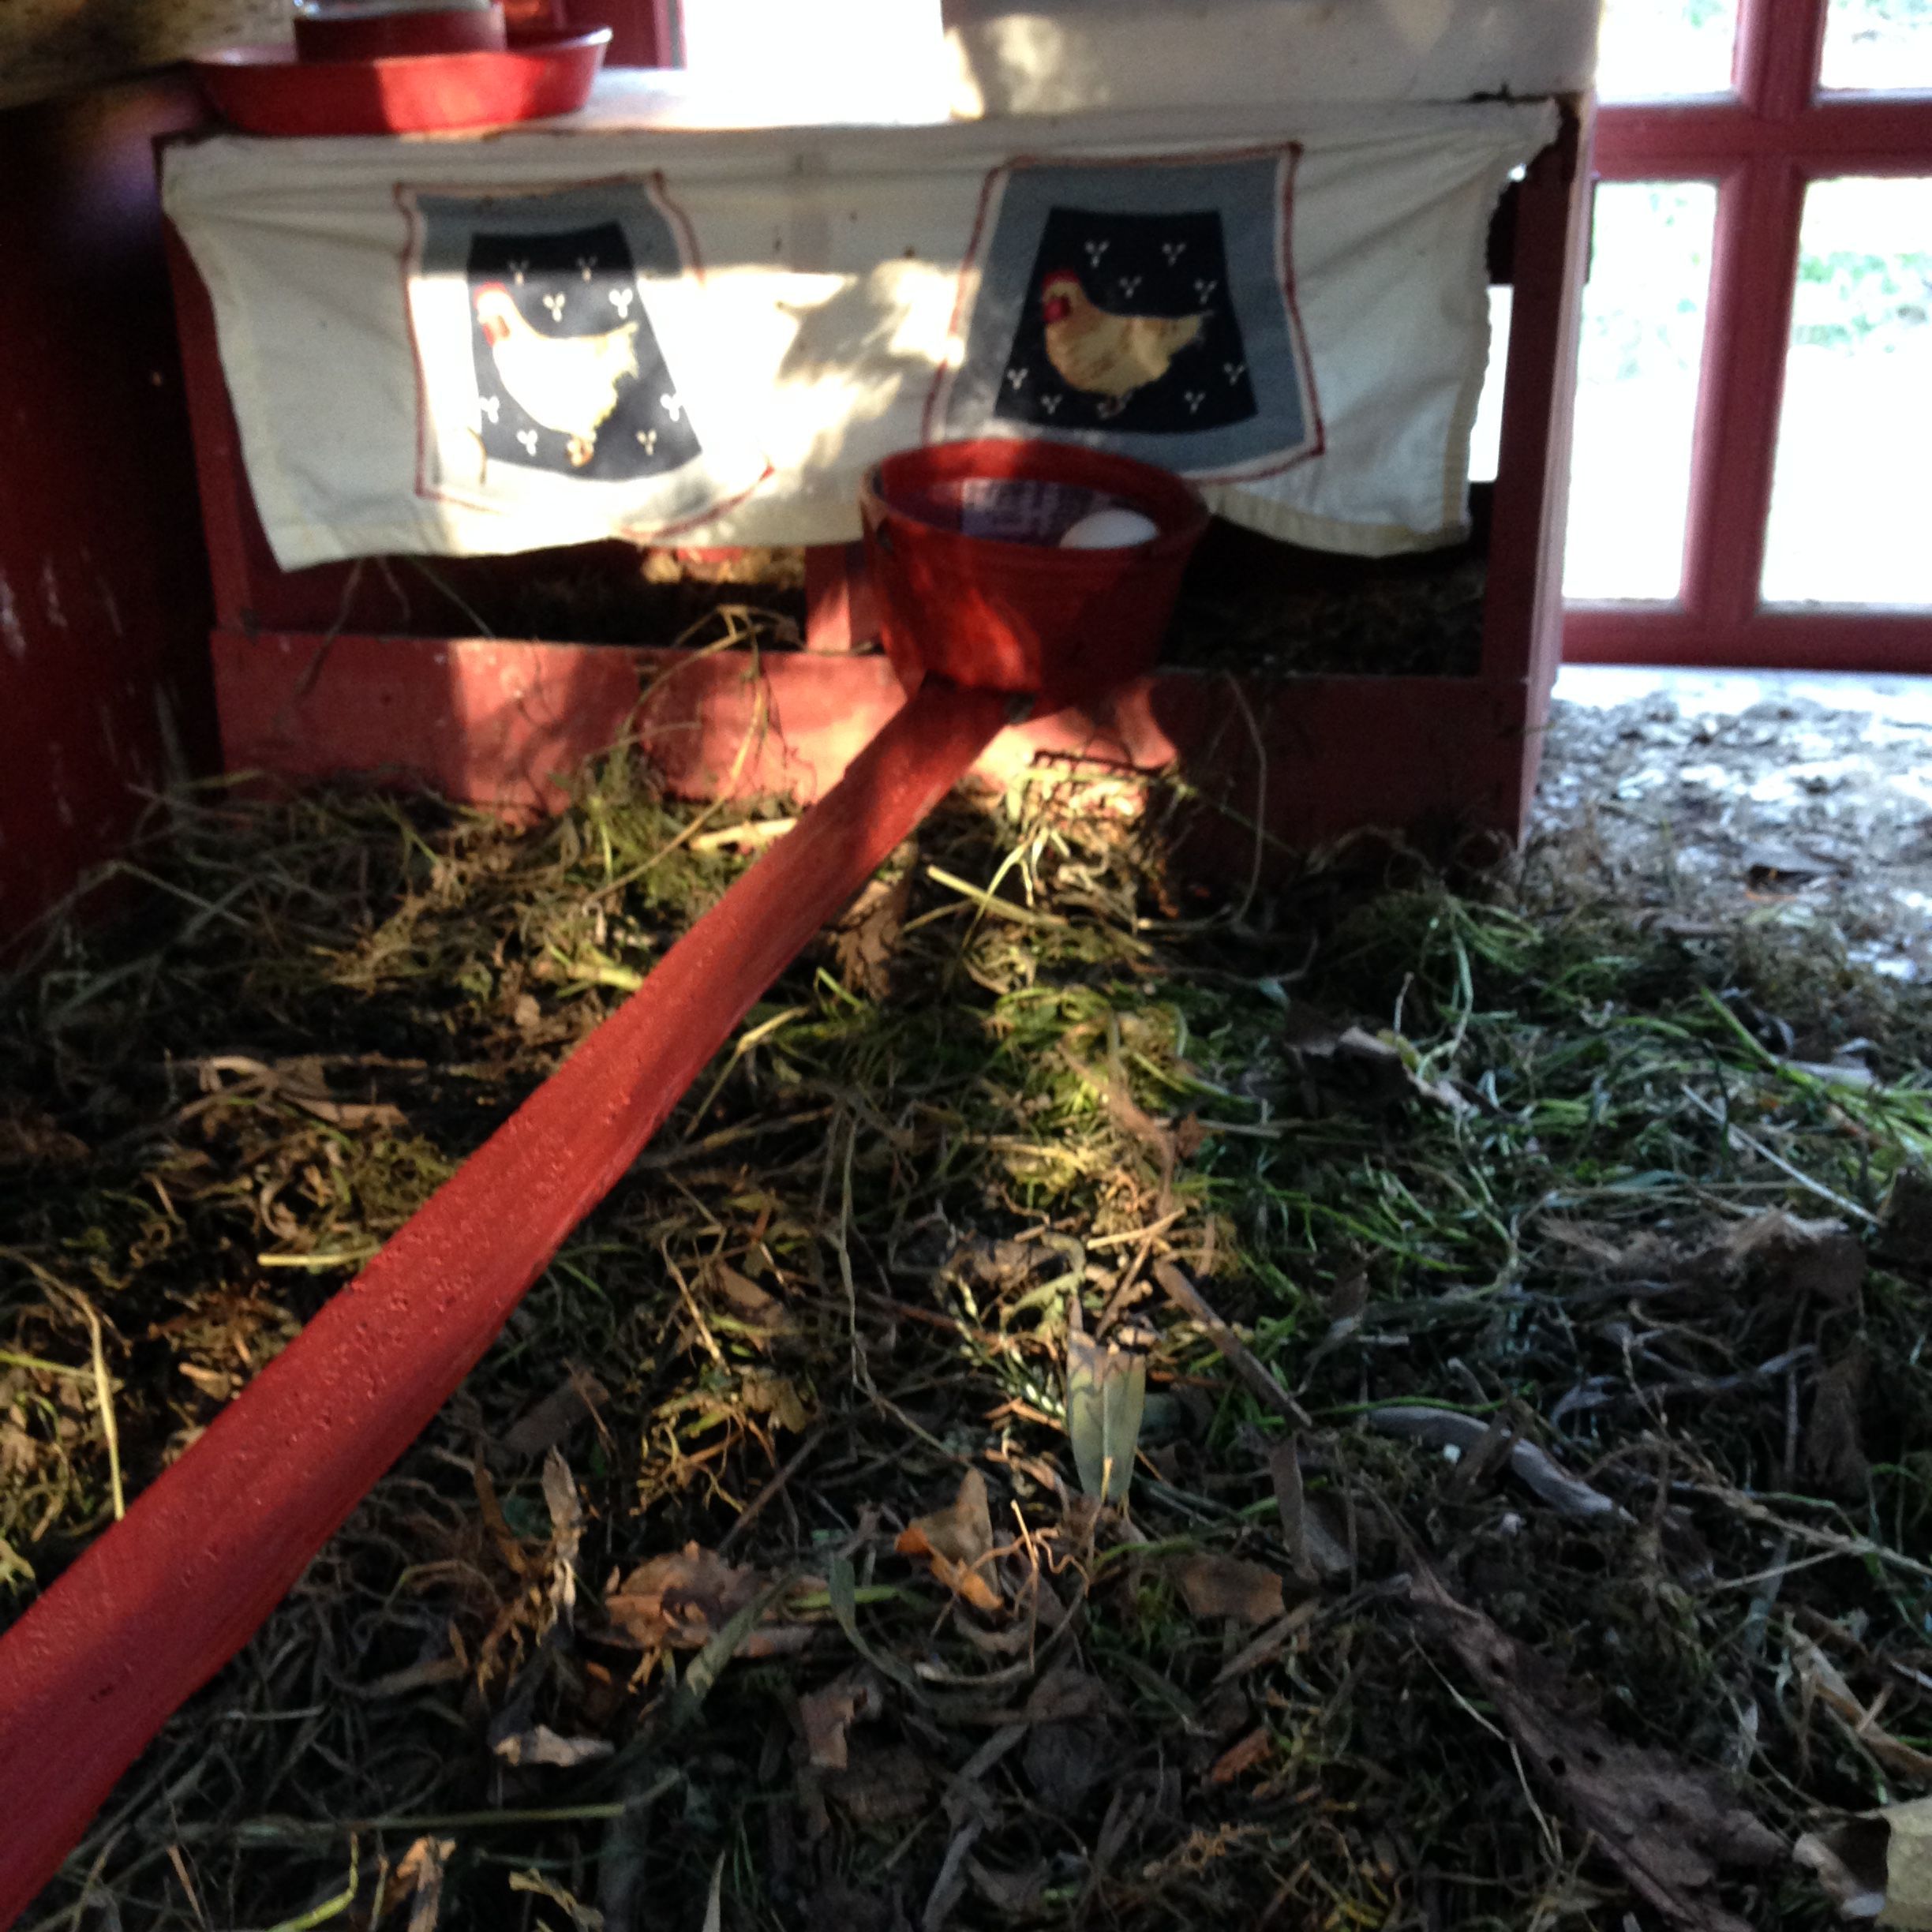 The nesting boxes are accessible from the window, but I found myself on the other side of the coop all the time. I made a McGyver-style contracption to get the eggs from that side of the coop :o)